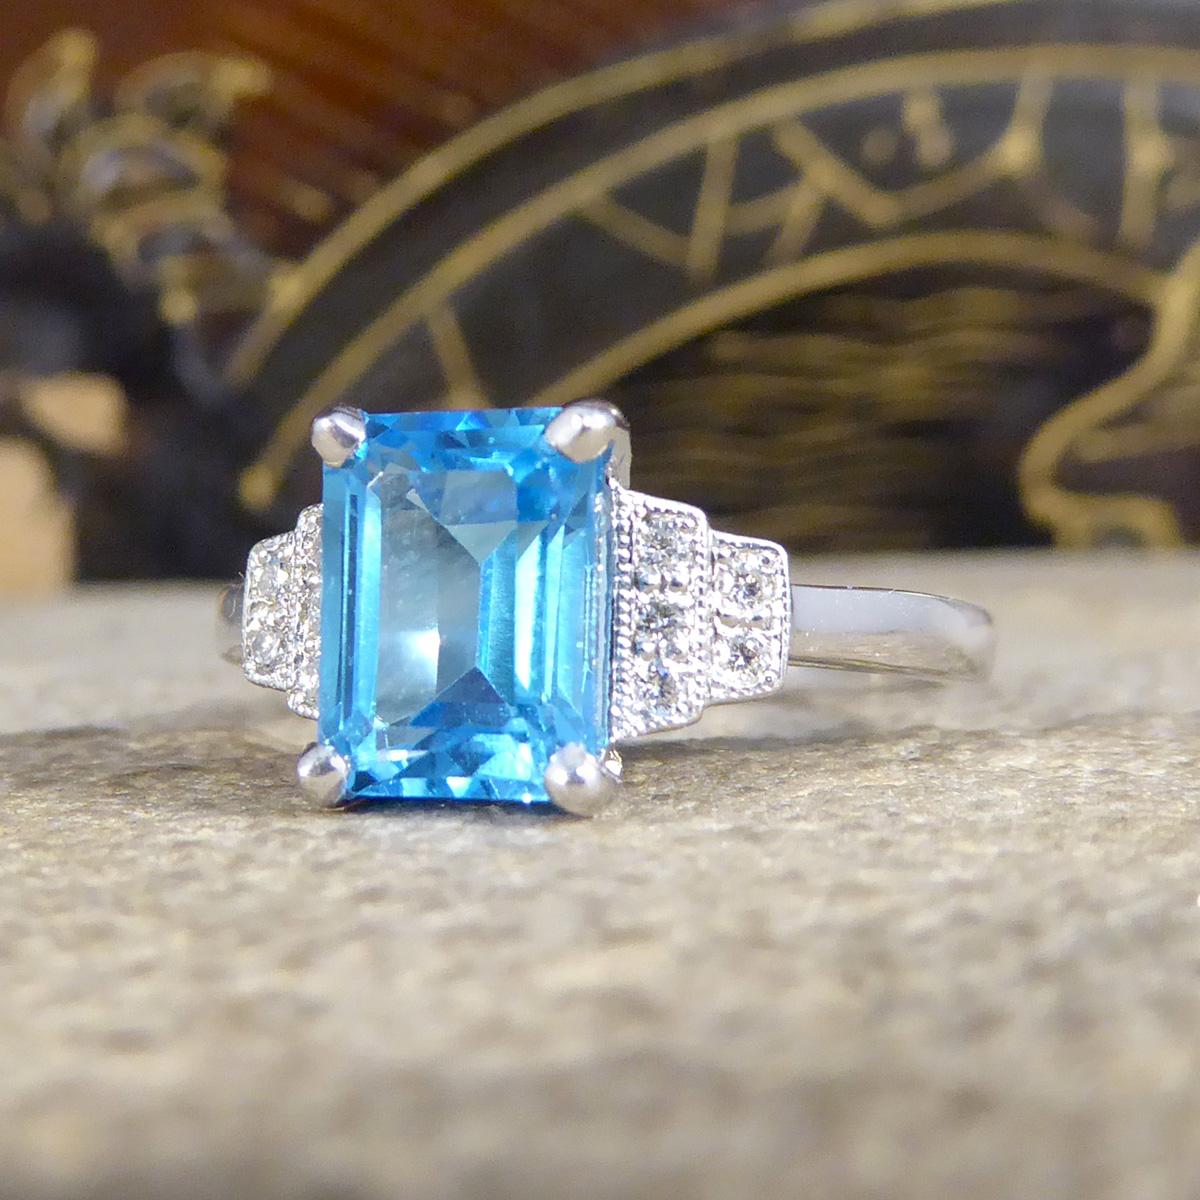 Art Deco Replica Blue Topaz and Diamond Ring in 9ct White Gold In New Condition For Sale In Yorkshire, West Yorkshire